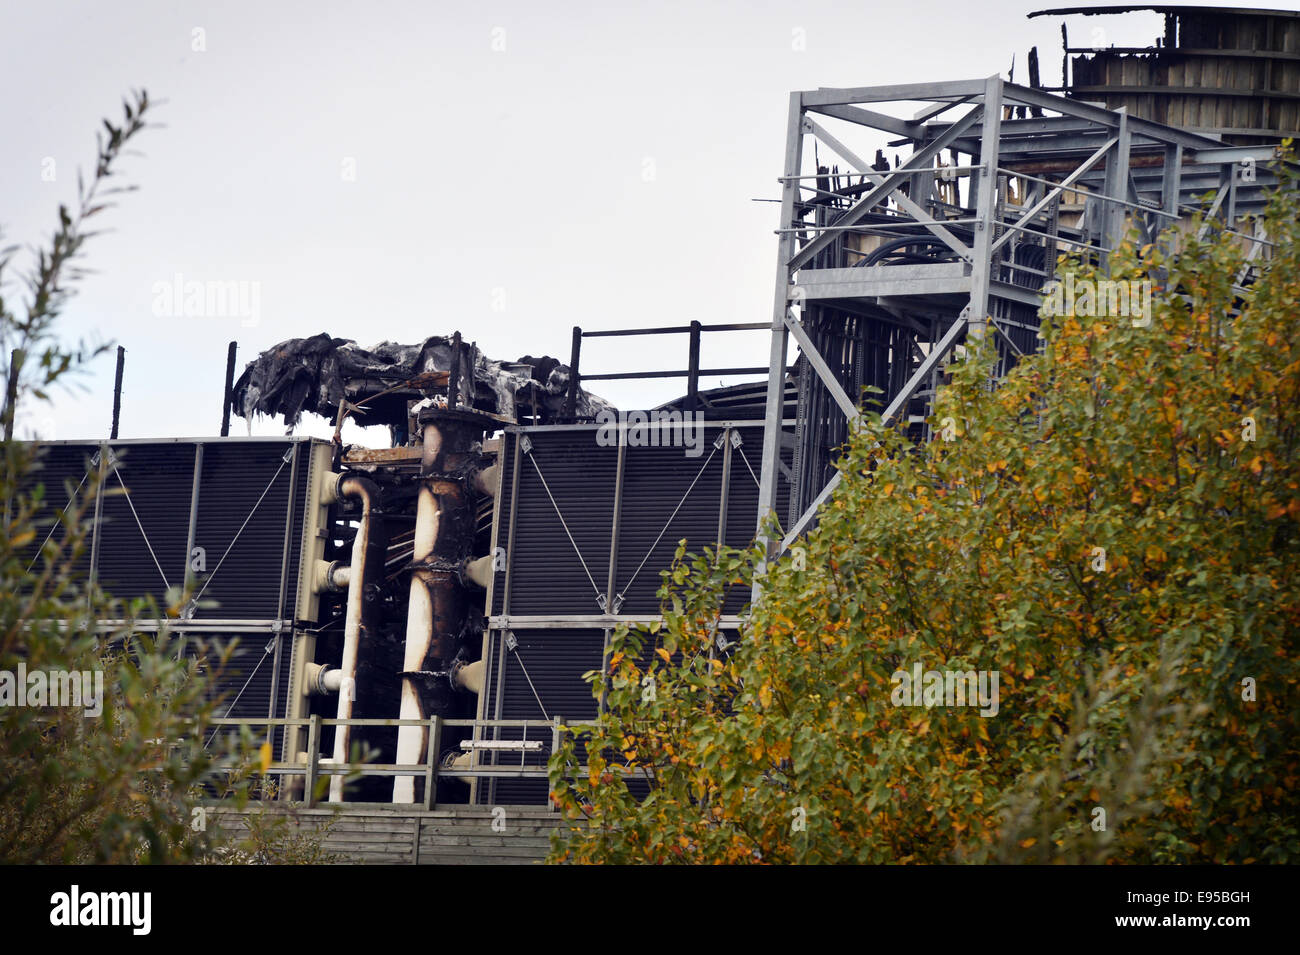 Didcot, UK. 20th Oct, 2014. Two fire service units remain at the Didcot B power station site which is owned by RWE npower after a fire blazed through the cooling towers Sunday evening. The power station is running at half capacity. photos by Sidney Bruere/Alamy Live News Stock Photo